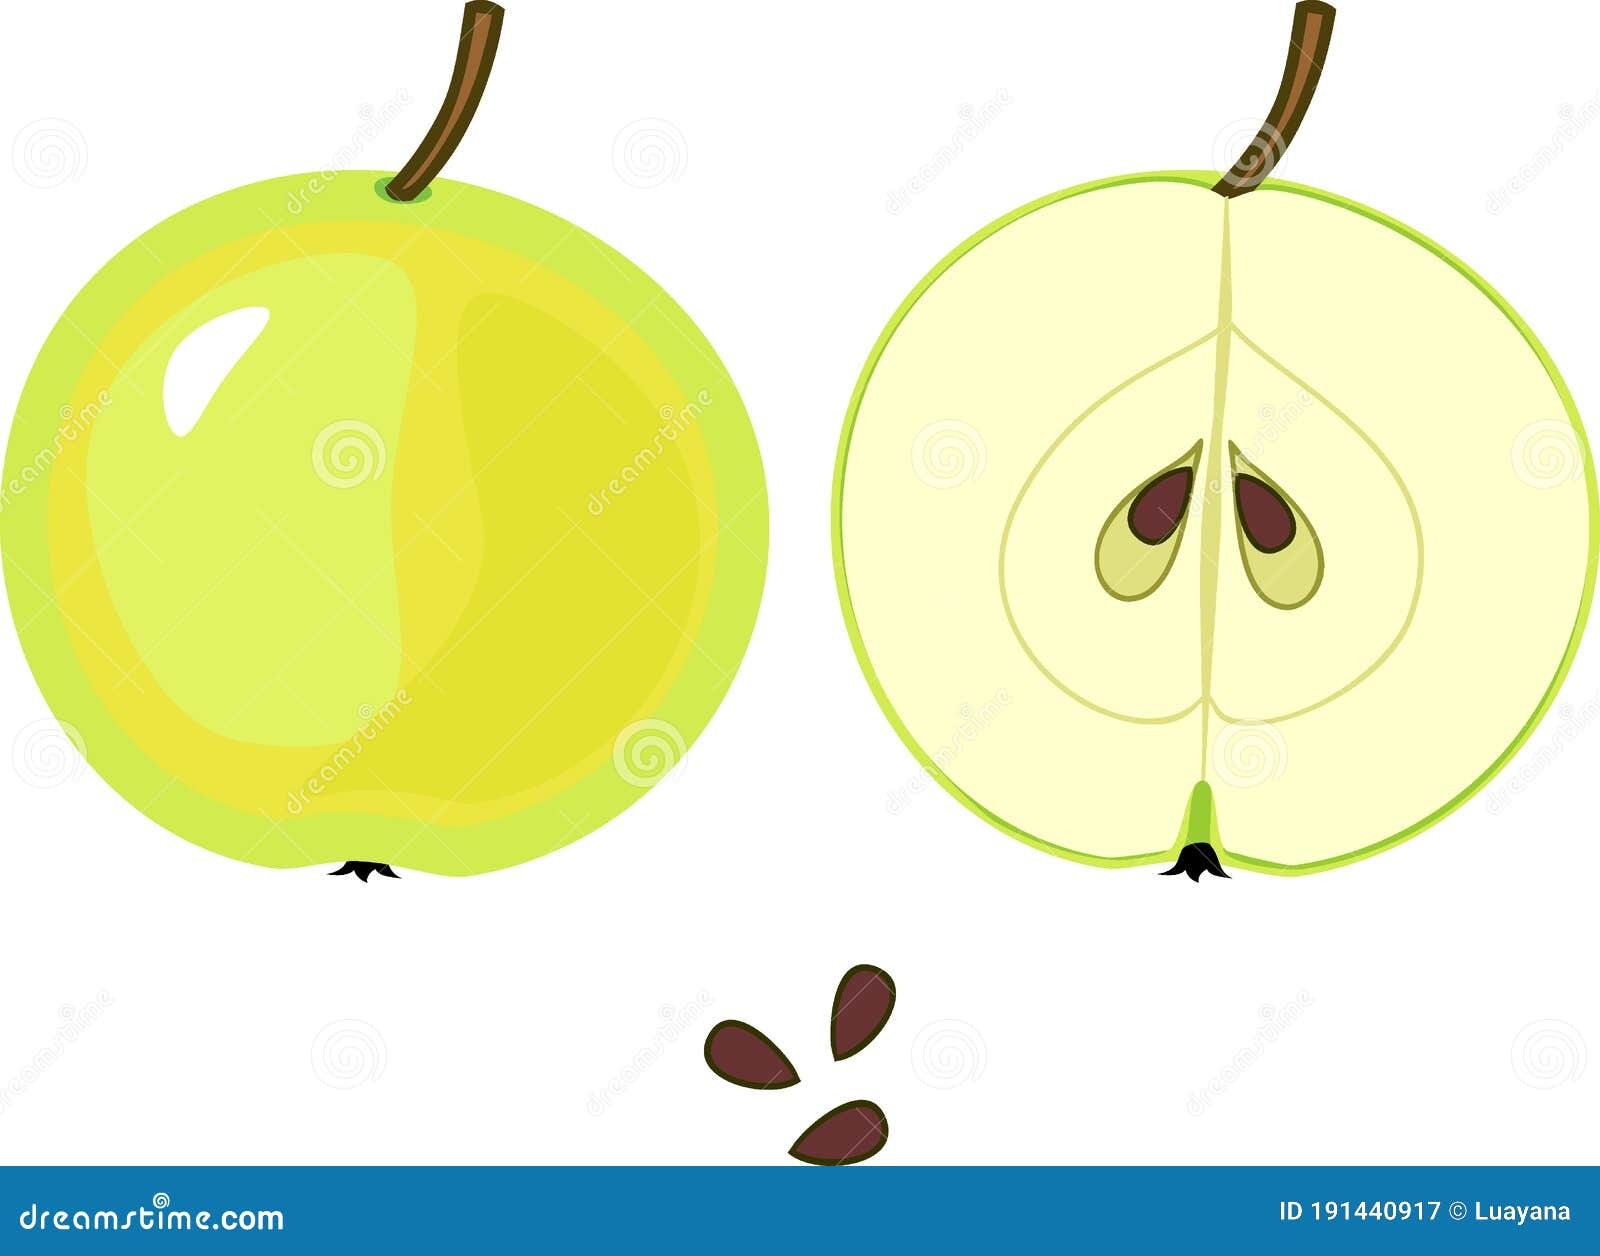 ripe green apple, whole and in longitudinal section